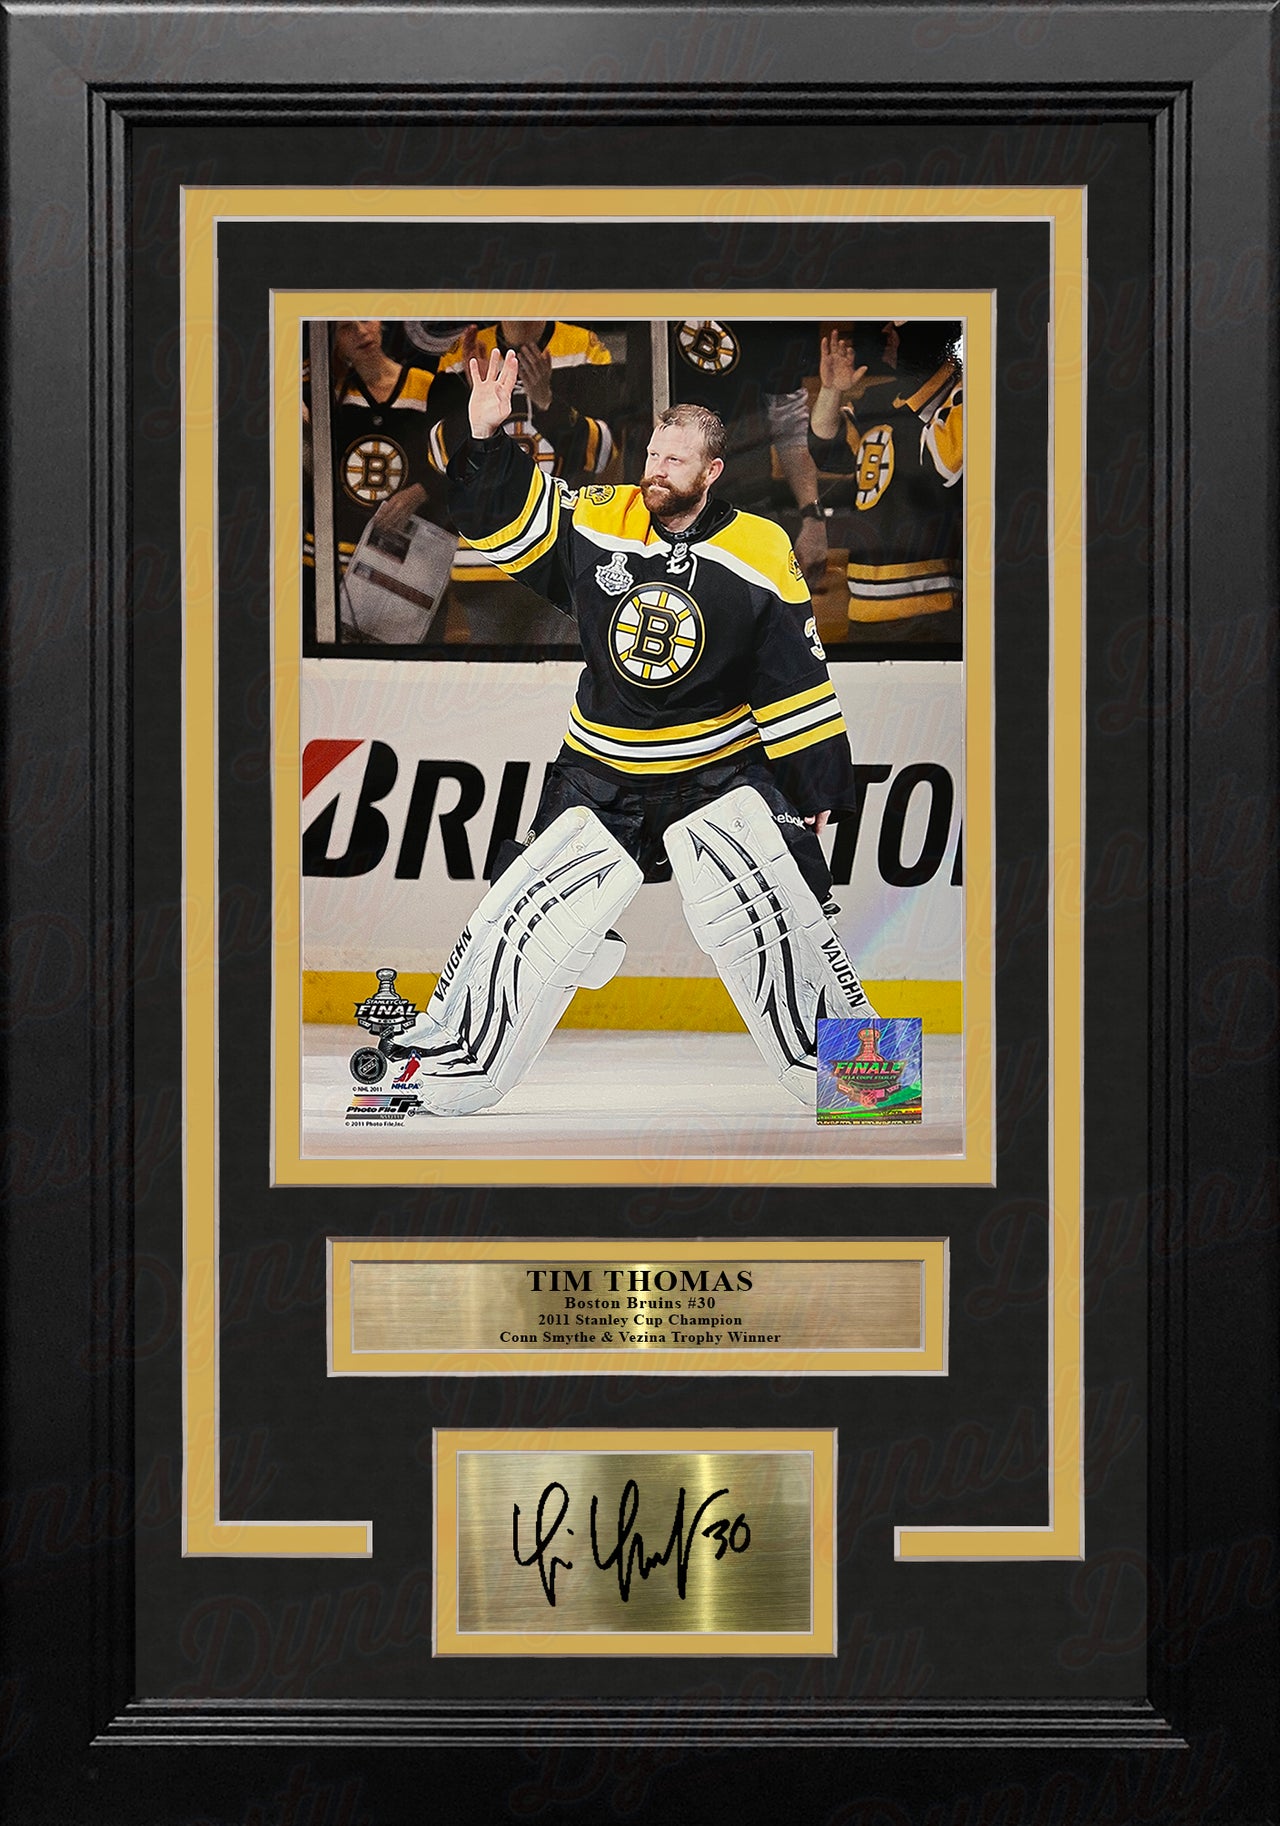 Tim Thomas 2011 Stanley Cup Finals Boston Bruins 8" x 10" Framed Hockey Photo with Engraved Autograph